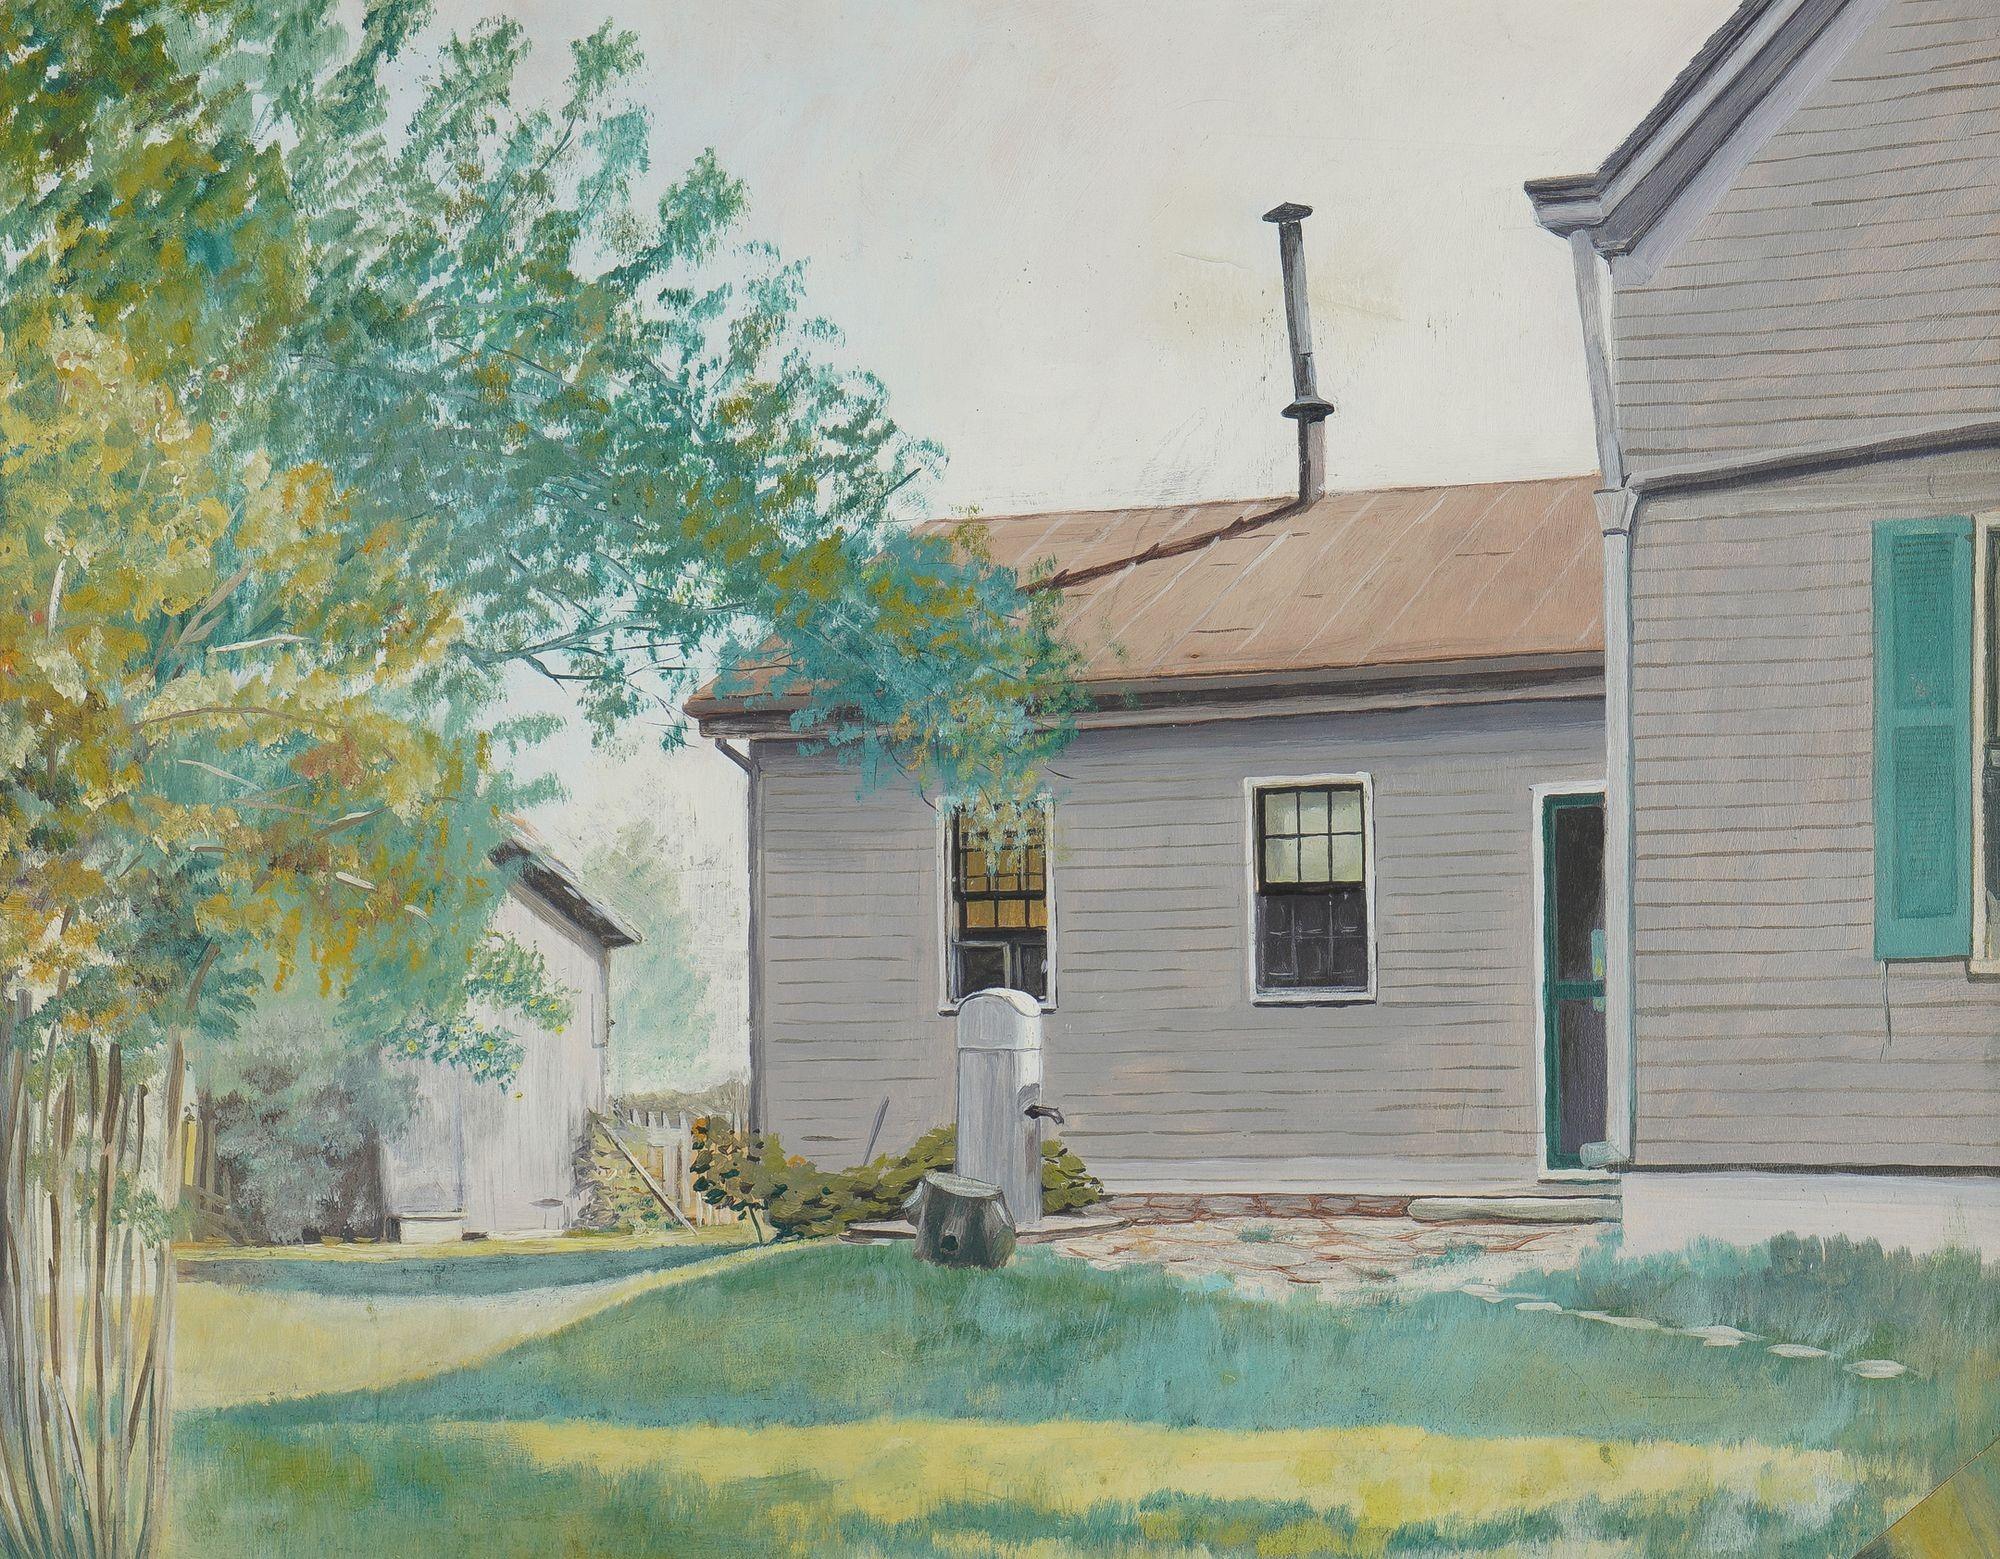 Midwestern oil on academy board summertime study of a clapboard house. The composition centers on a well pump in the yard, and a large tree branch arches in from the left side of the frame, reaching towards the house. We are given a truncated view